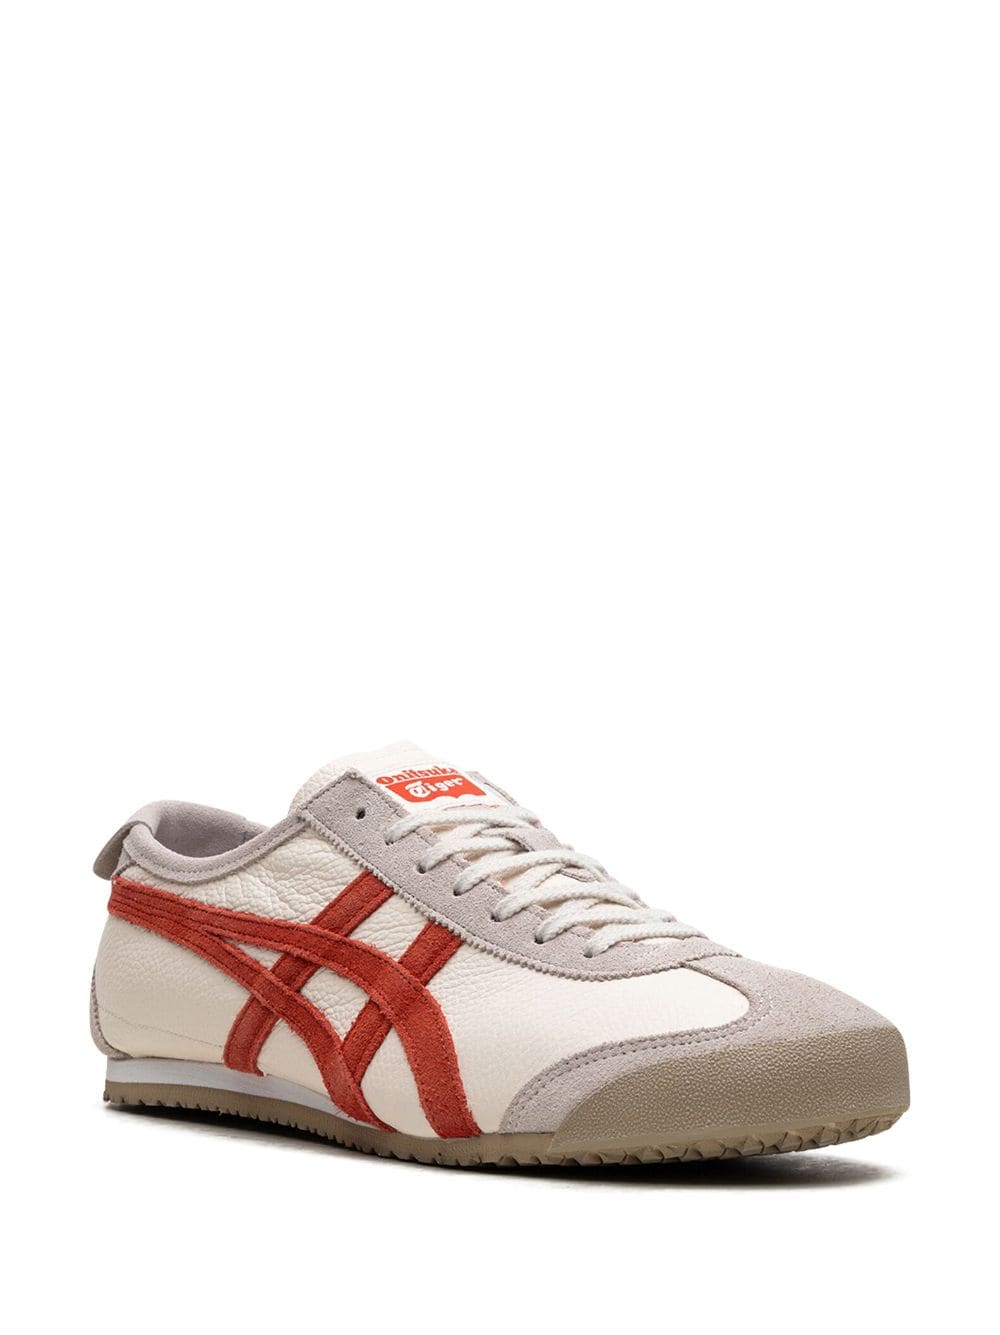 Onitsuka Tiger "Mexico 66 Vin ""Beige White Red"" sneakers"